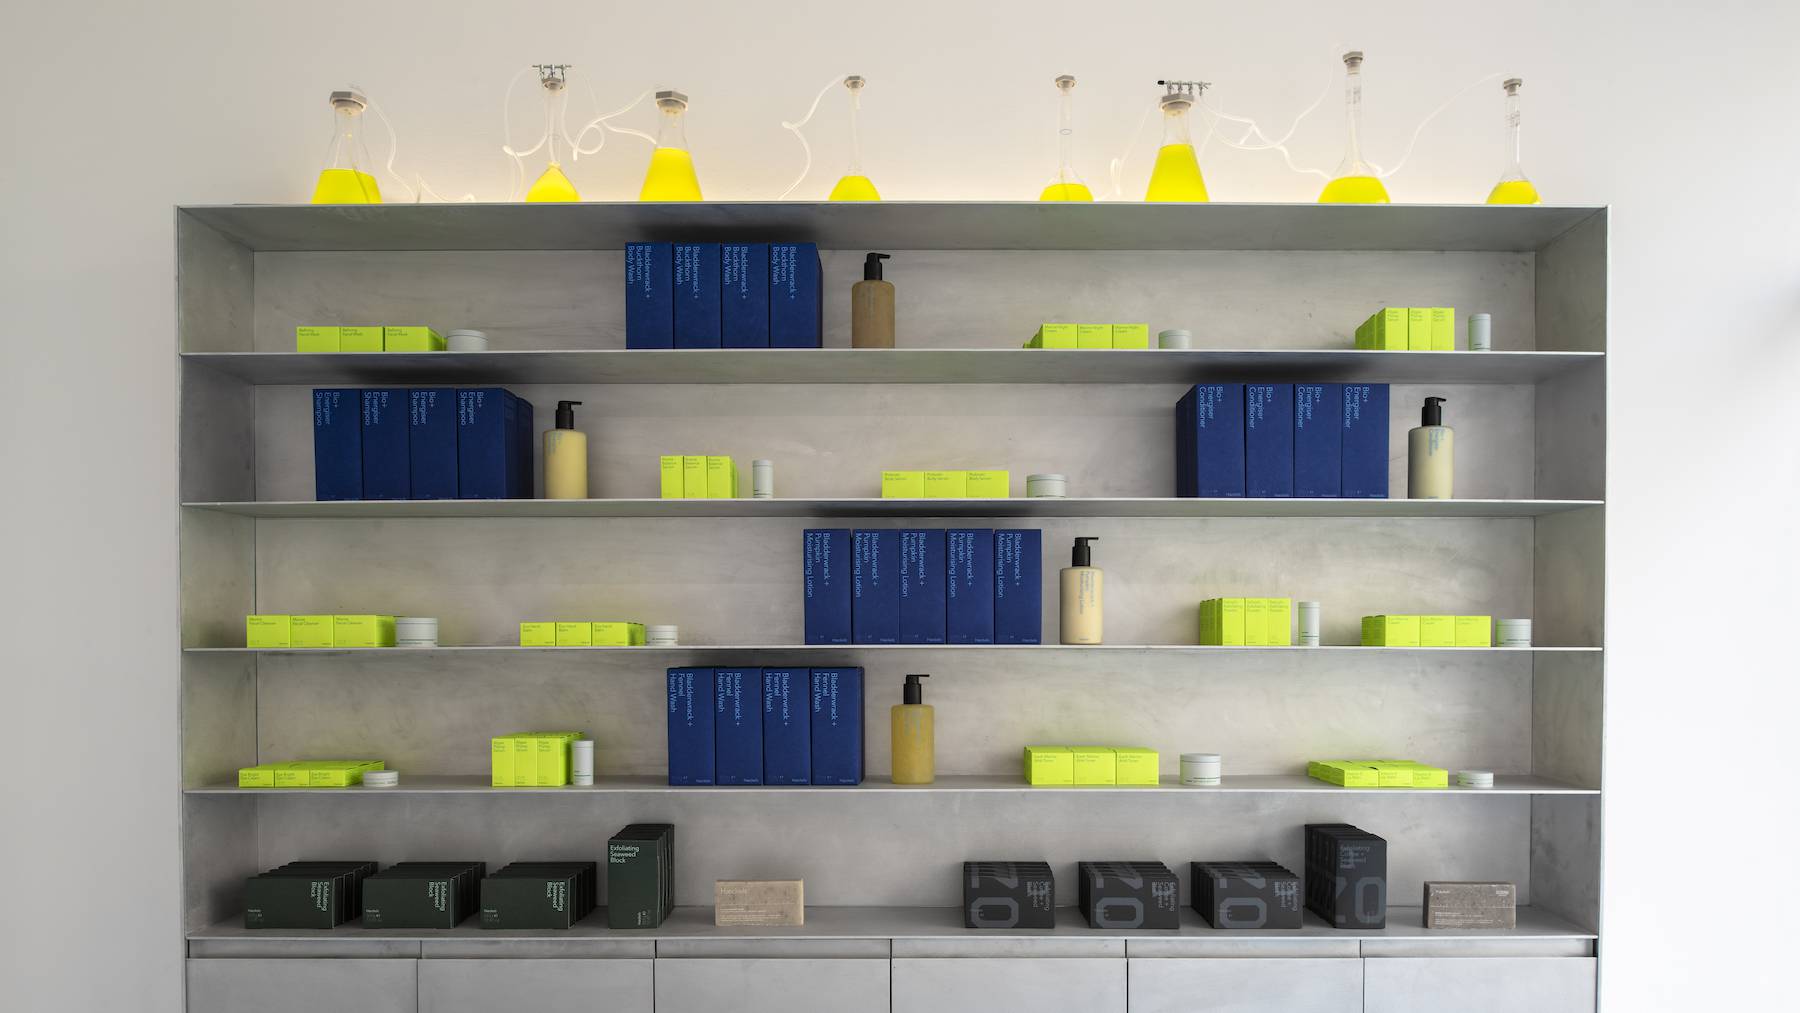 A set of shelves in one of Haeckels' stores displaying candles, soap and skincare with bioreactors of spirulina on the top-most shelf.